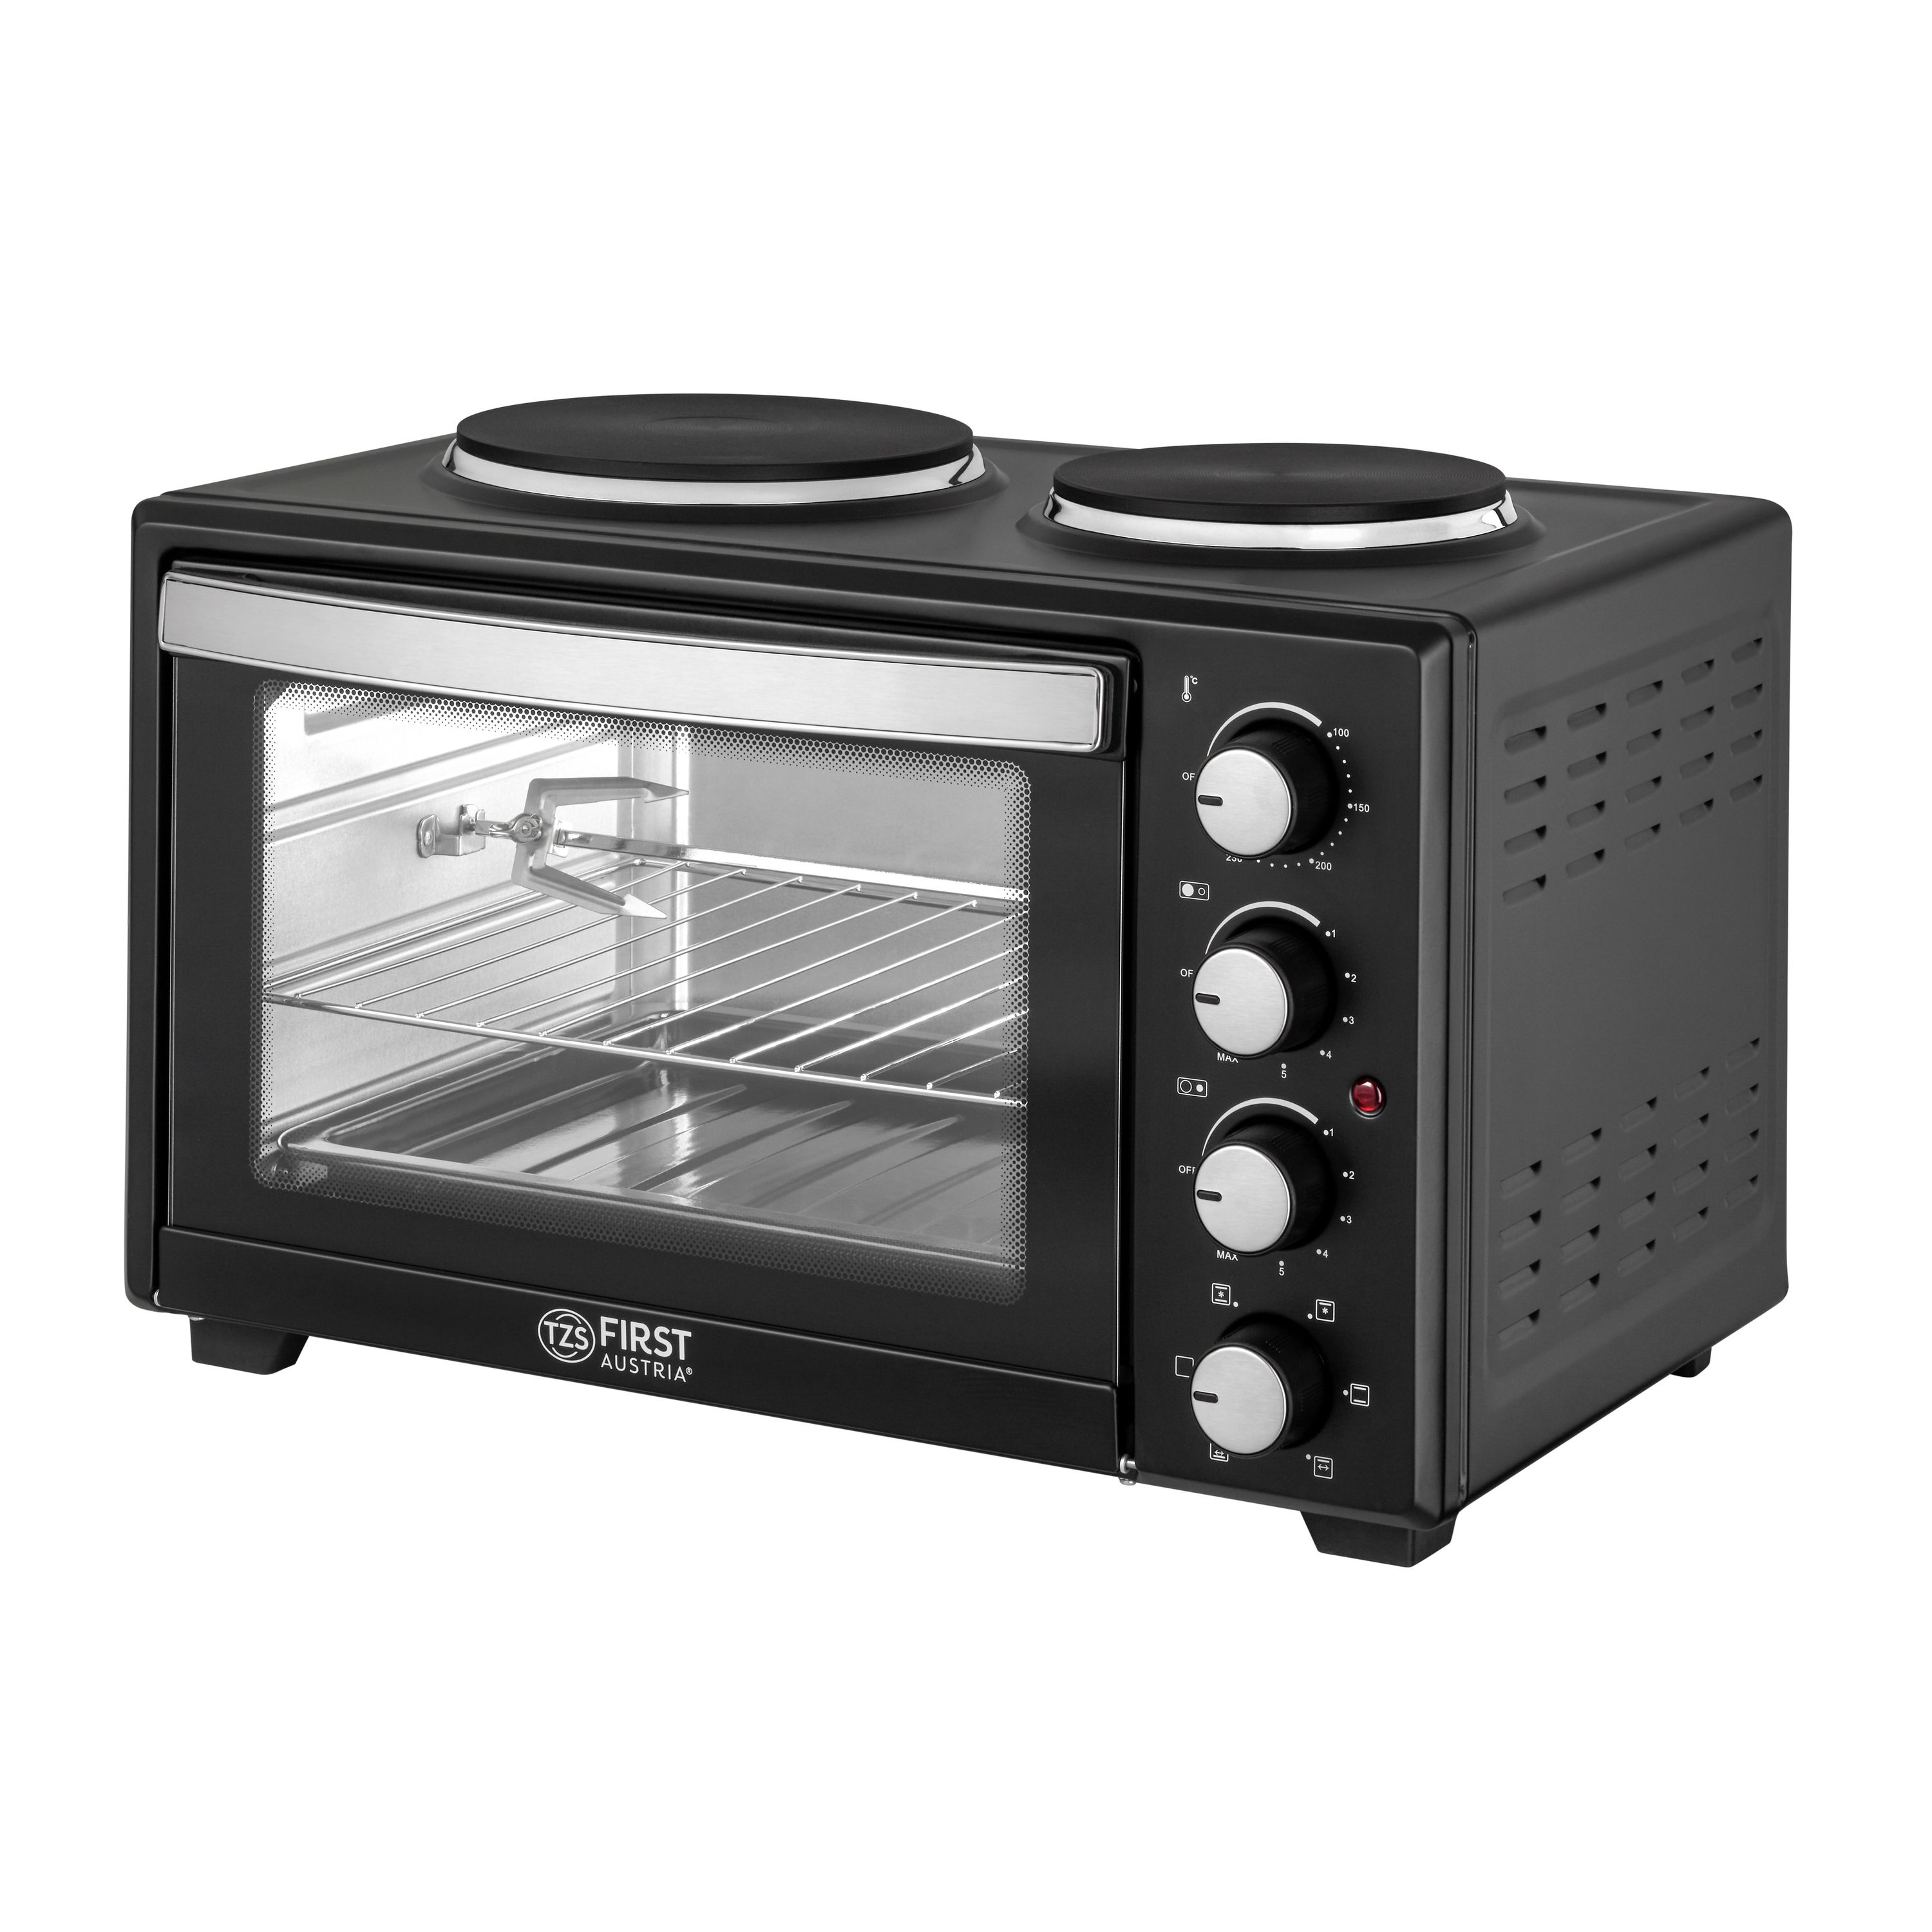 Mini oven with hot plates | 30L, 45L or 60L